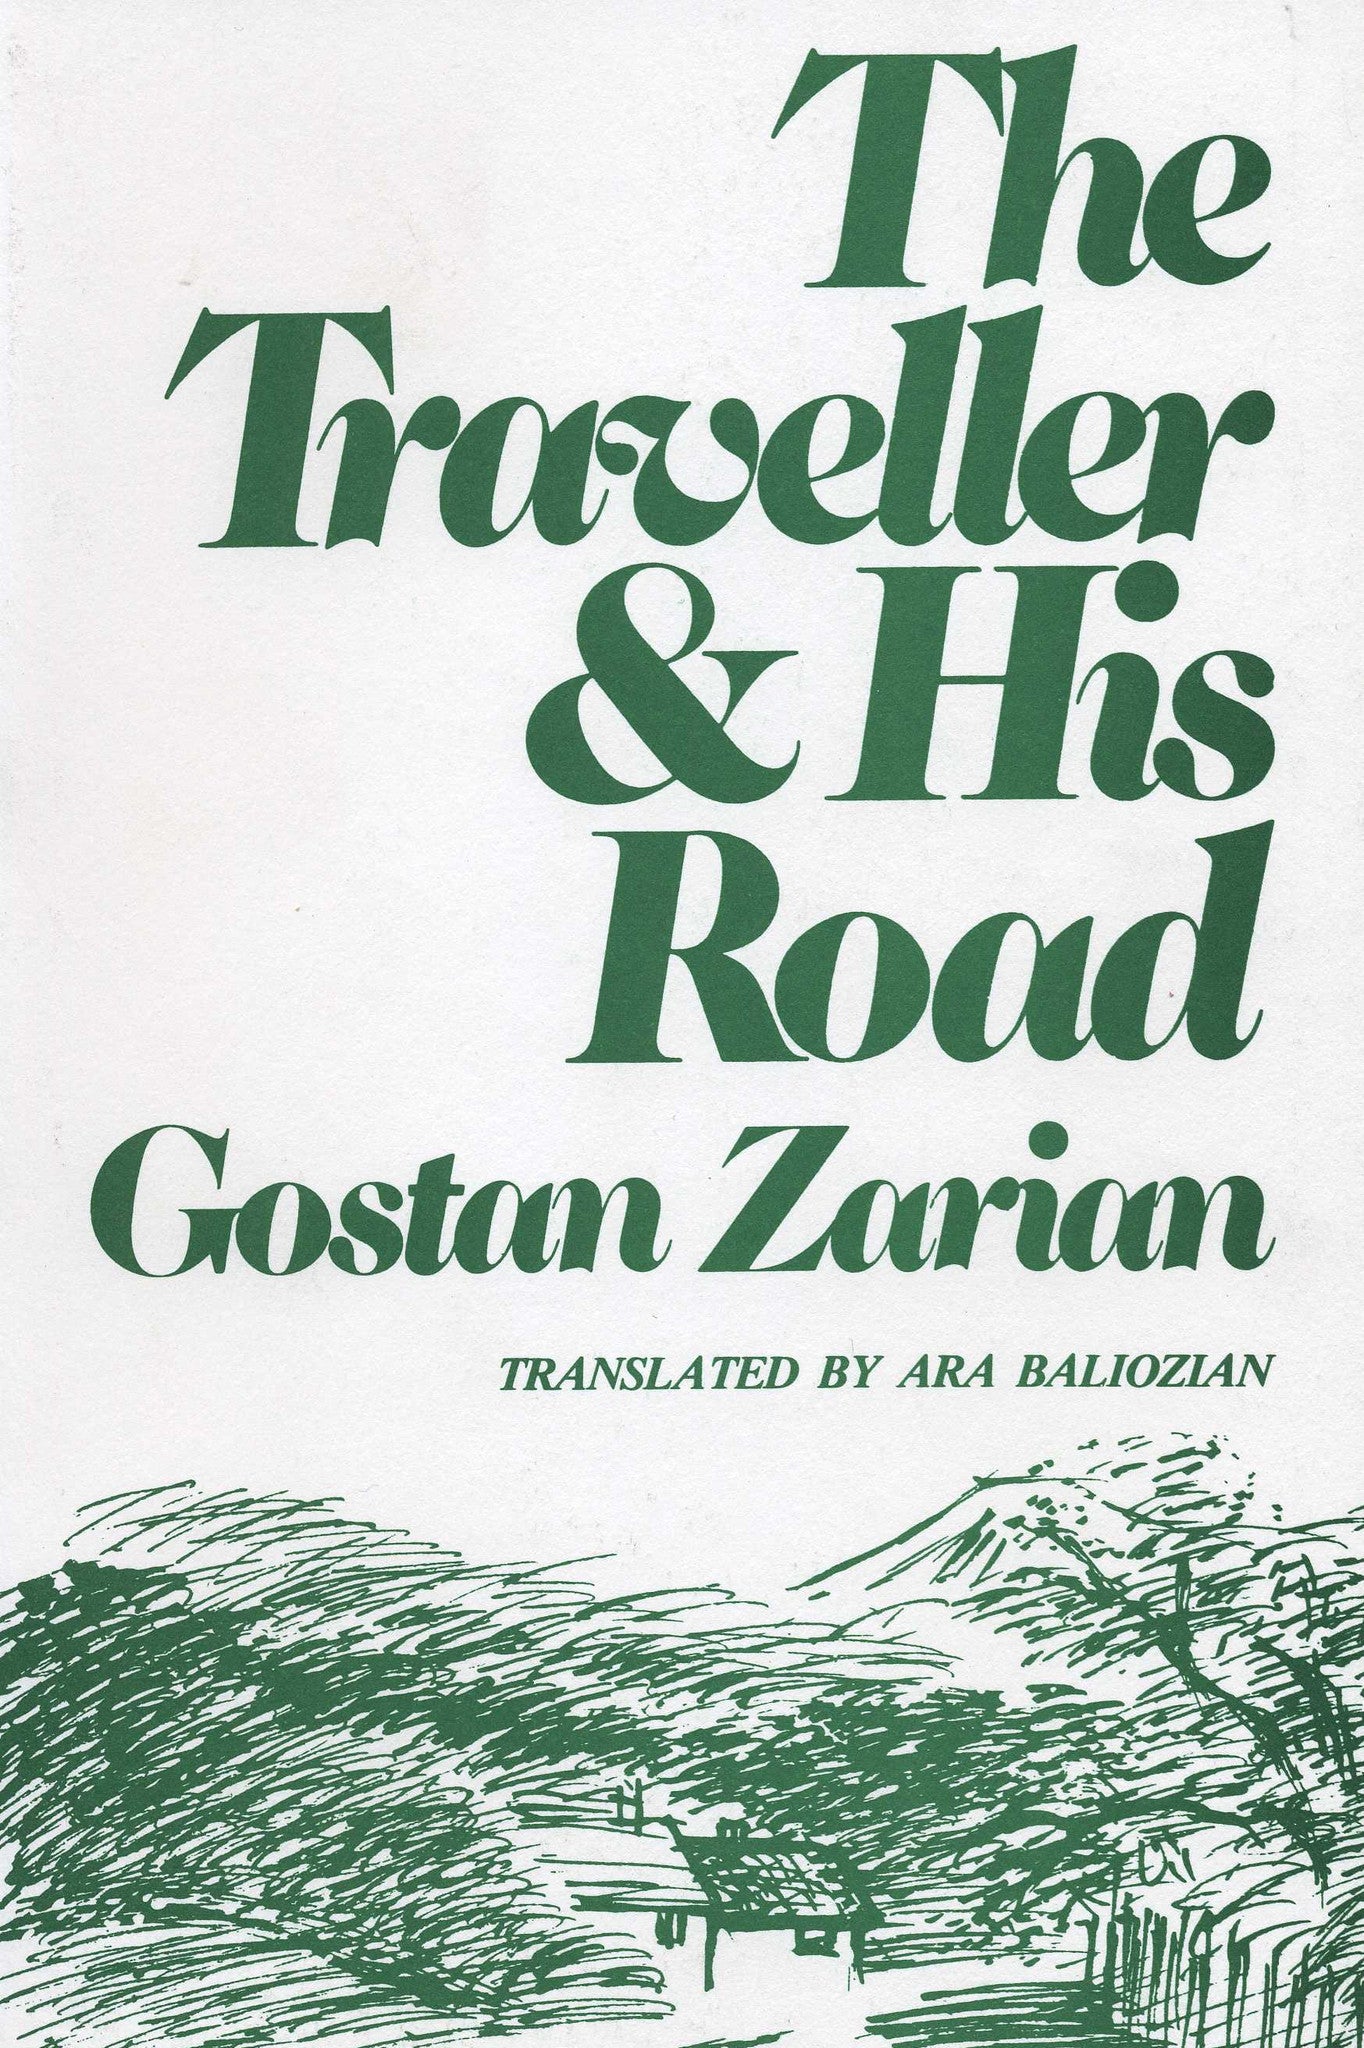 TRAVELLER AND HIS ROAD, THE